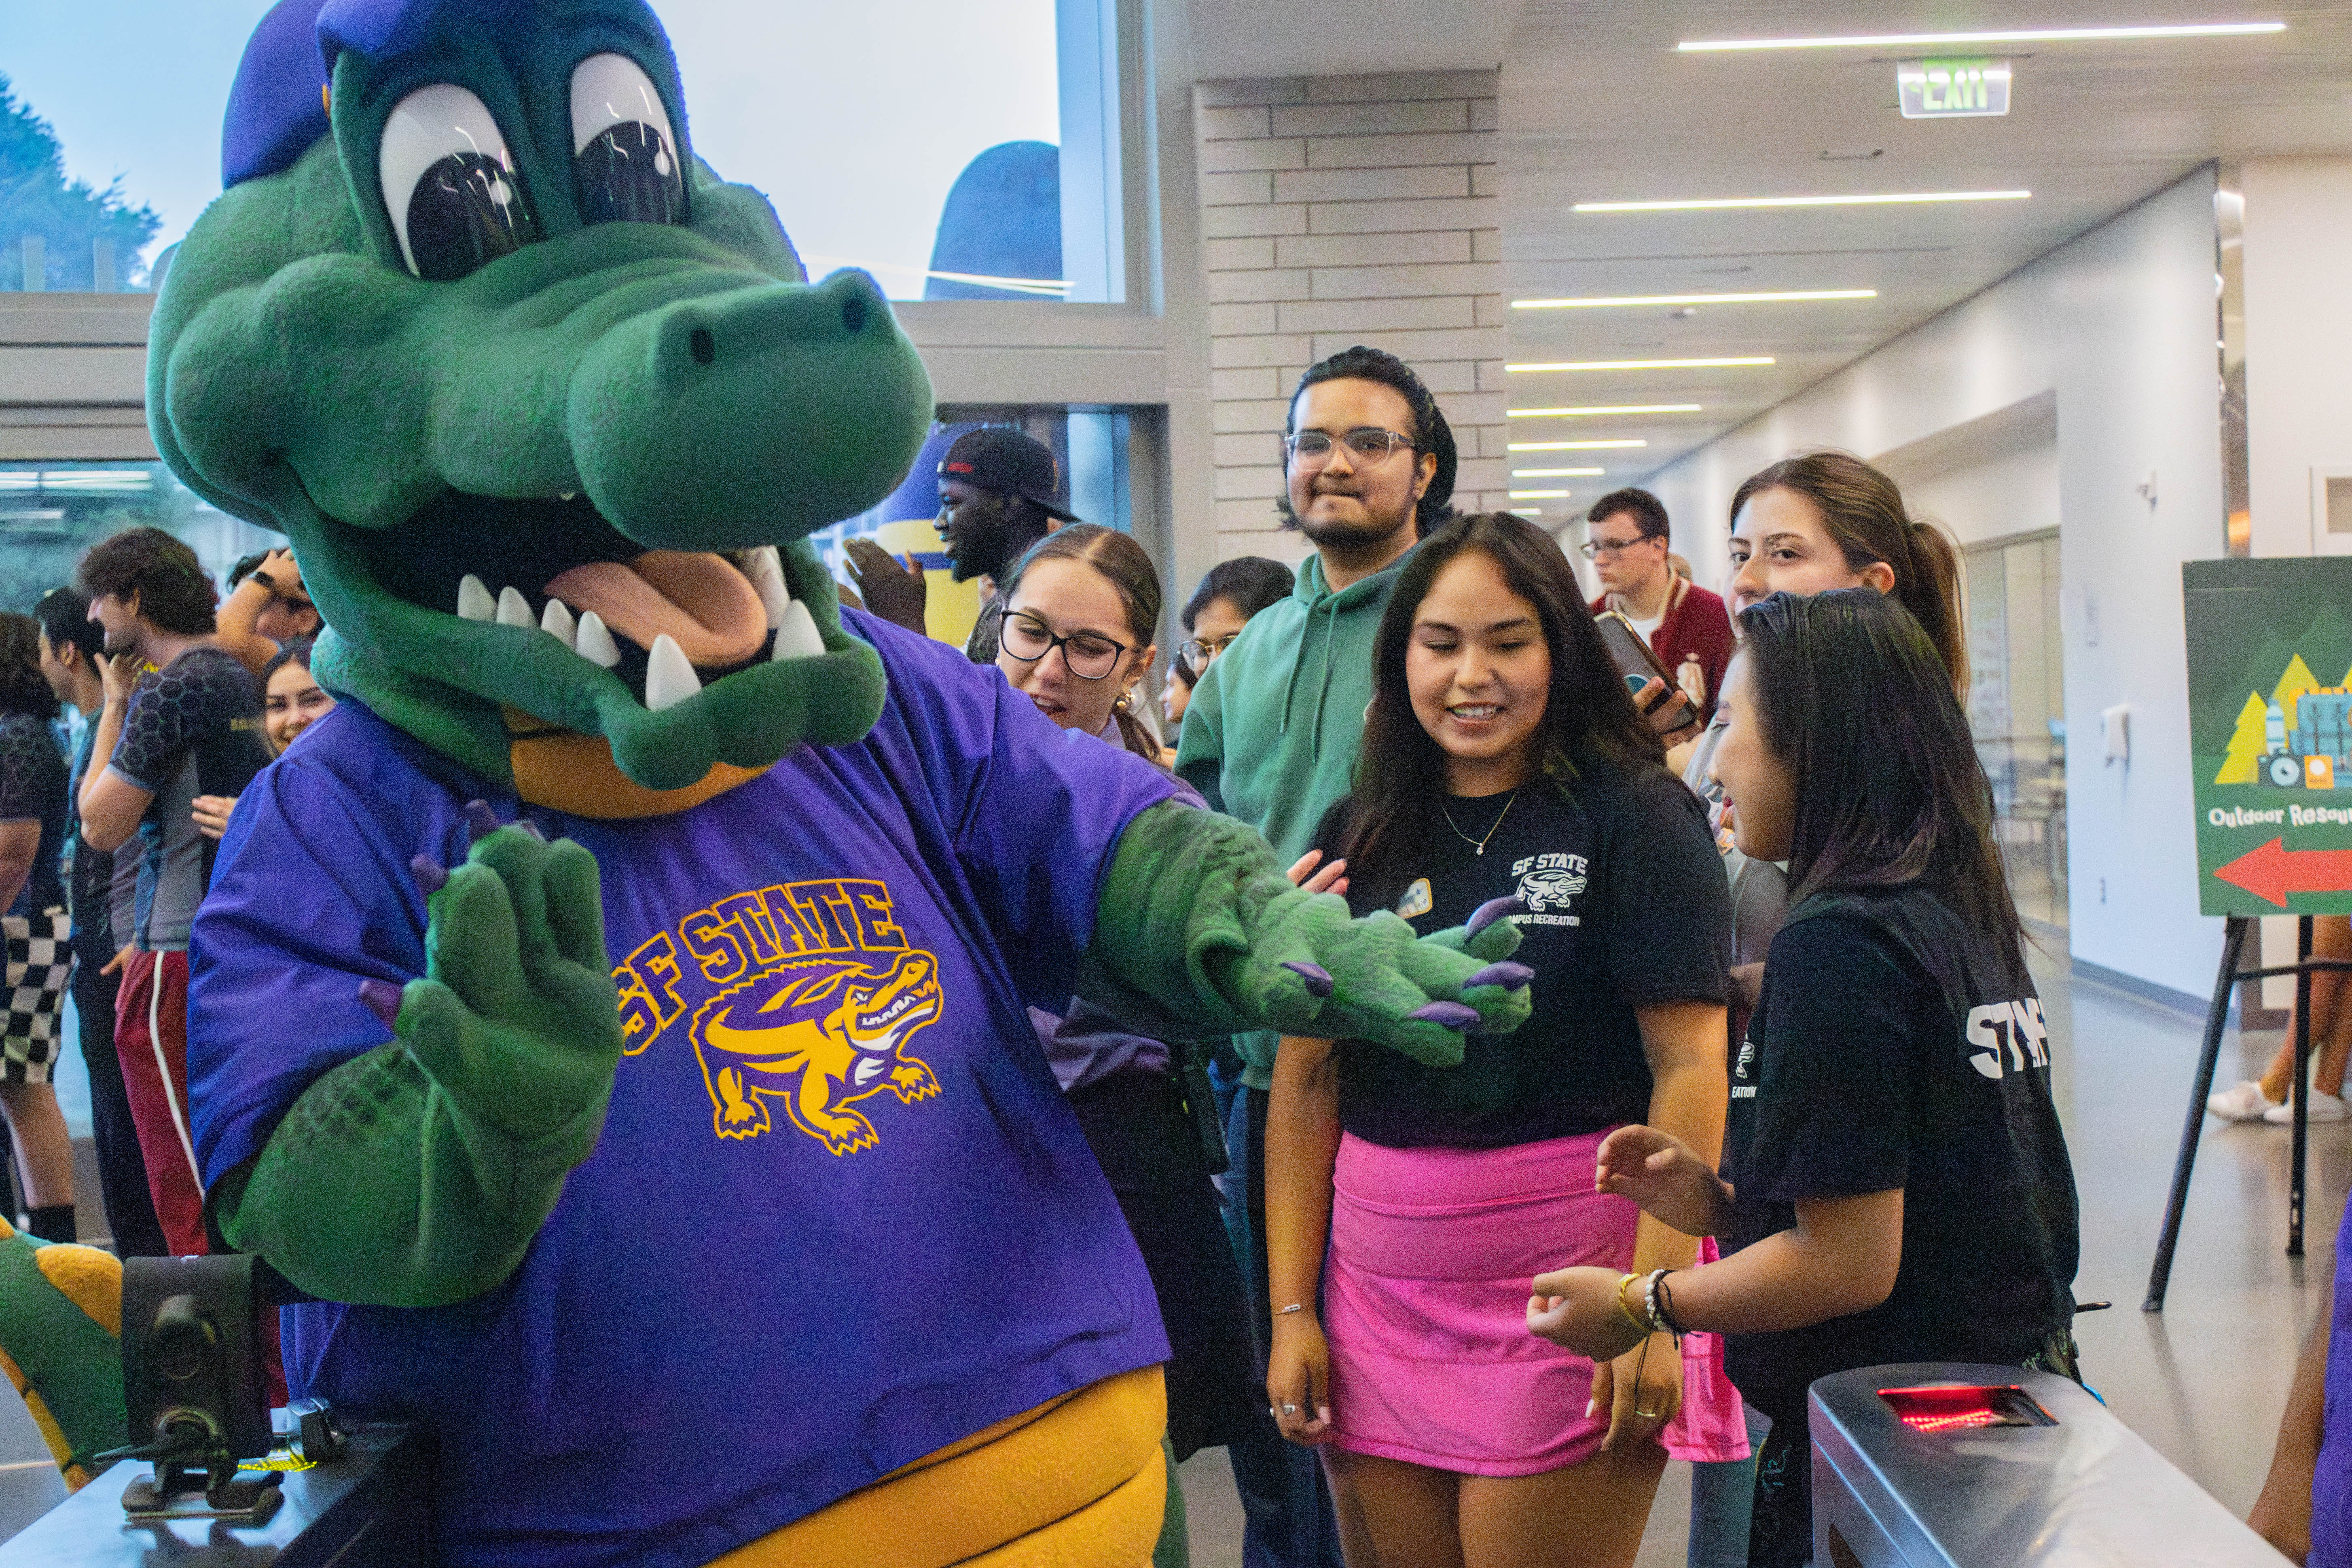 Ali the Gator mascot moving through a crowd of happy students and staff